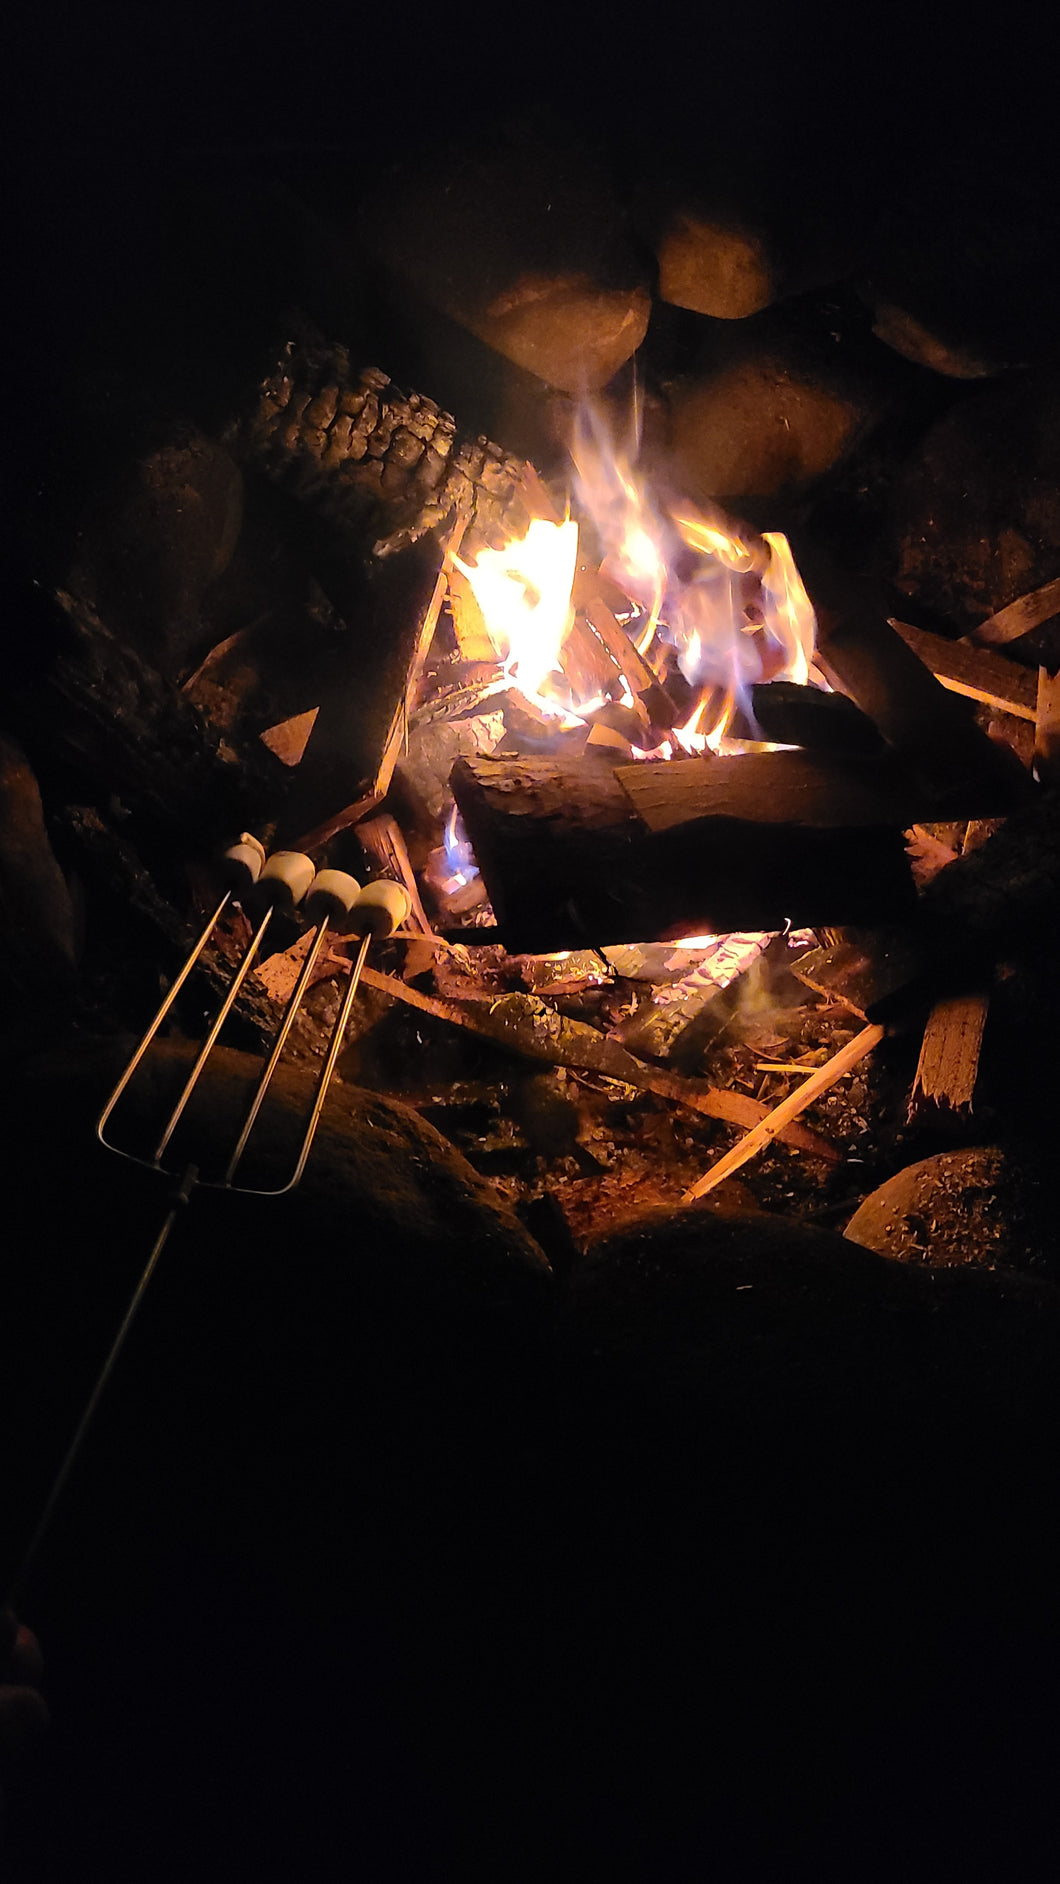 The Fire Fork